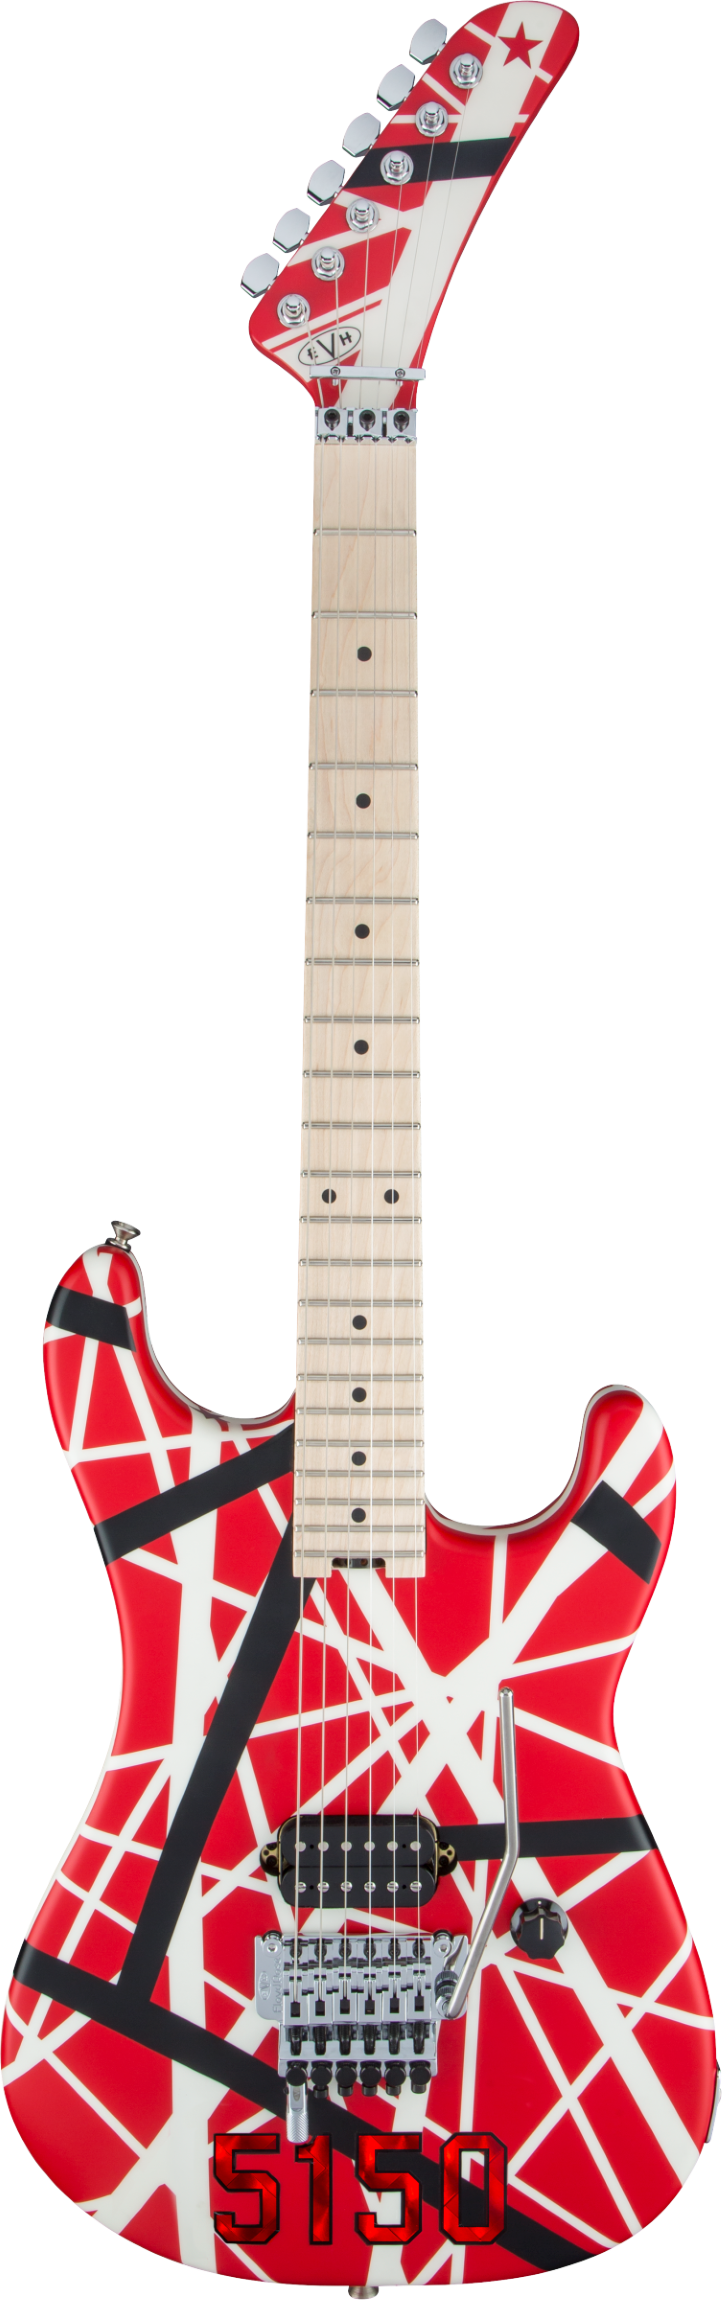 EVH Striped Series 5150, Maple Fingerboard, Red with Black and White Stripes : photo 1